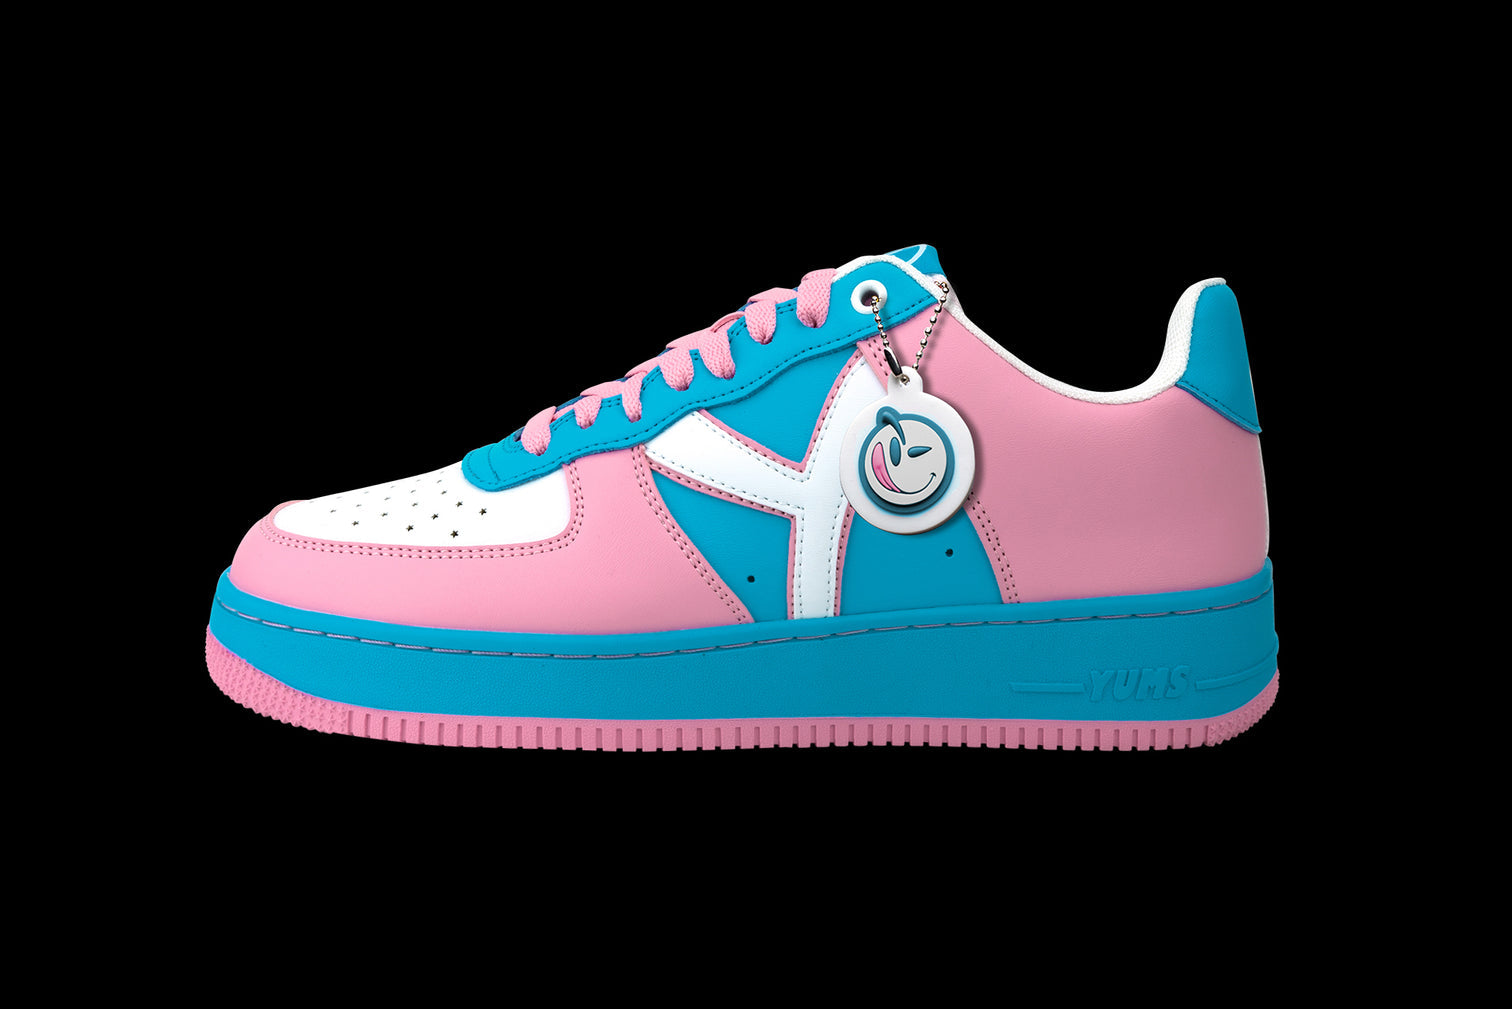 Yums sneakers “cotton candy”